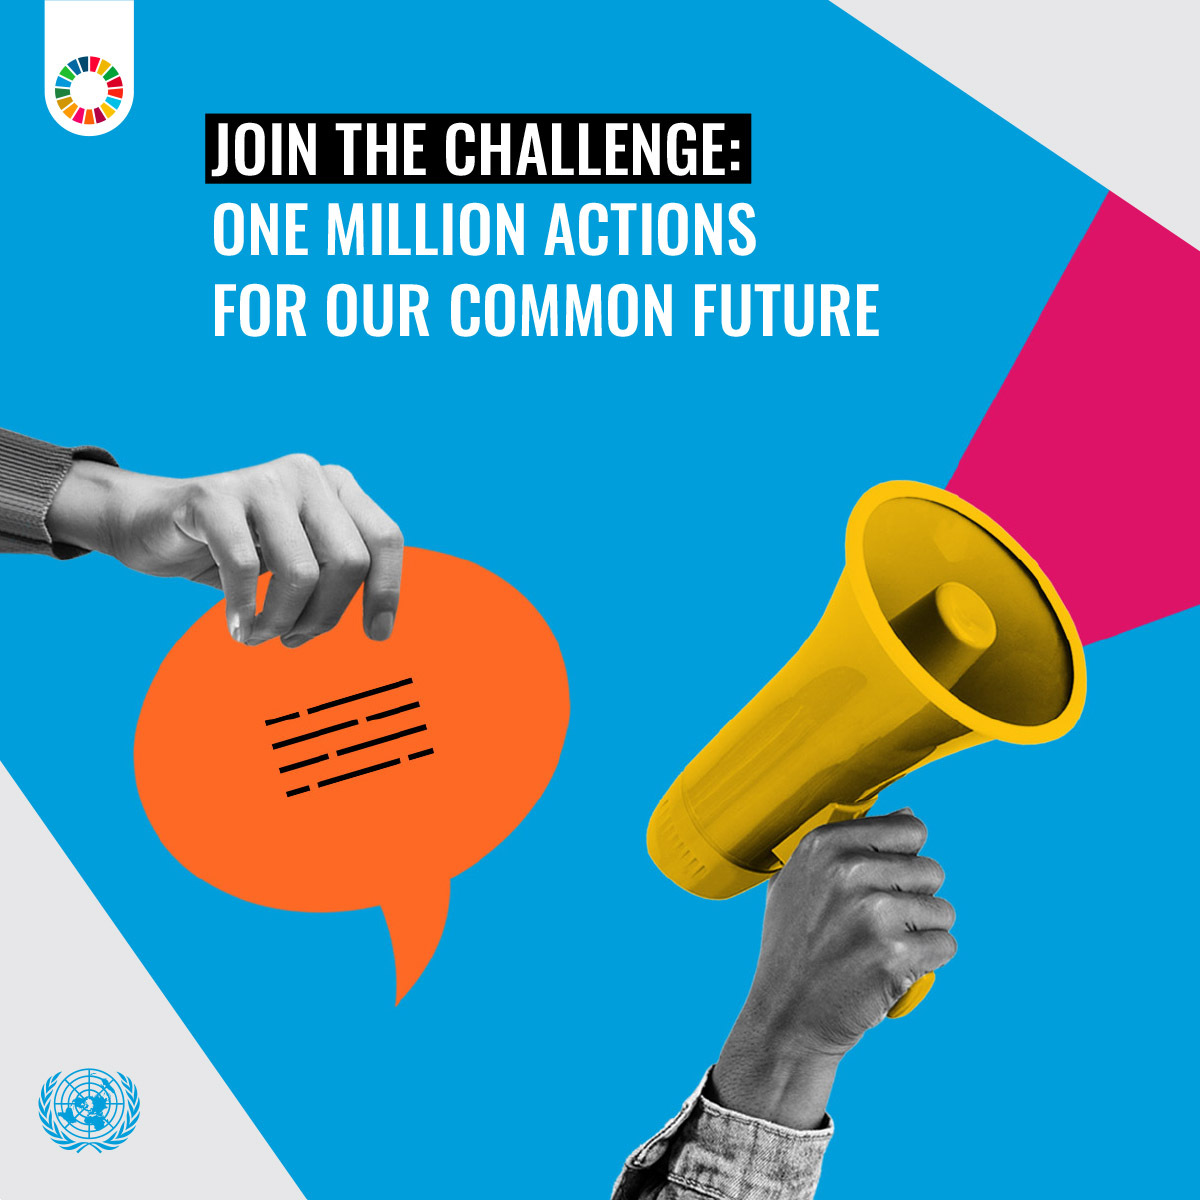 Join the #ActNow challenge! Let’s reach 1M actions for #OurCommonFuture. Get inspired and see what you can do for the #GlobalGoals 🌏 ➡️ bit.ly/SoF24-challenge